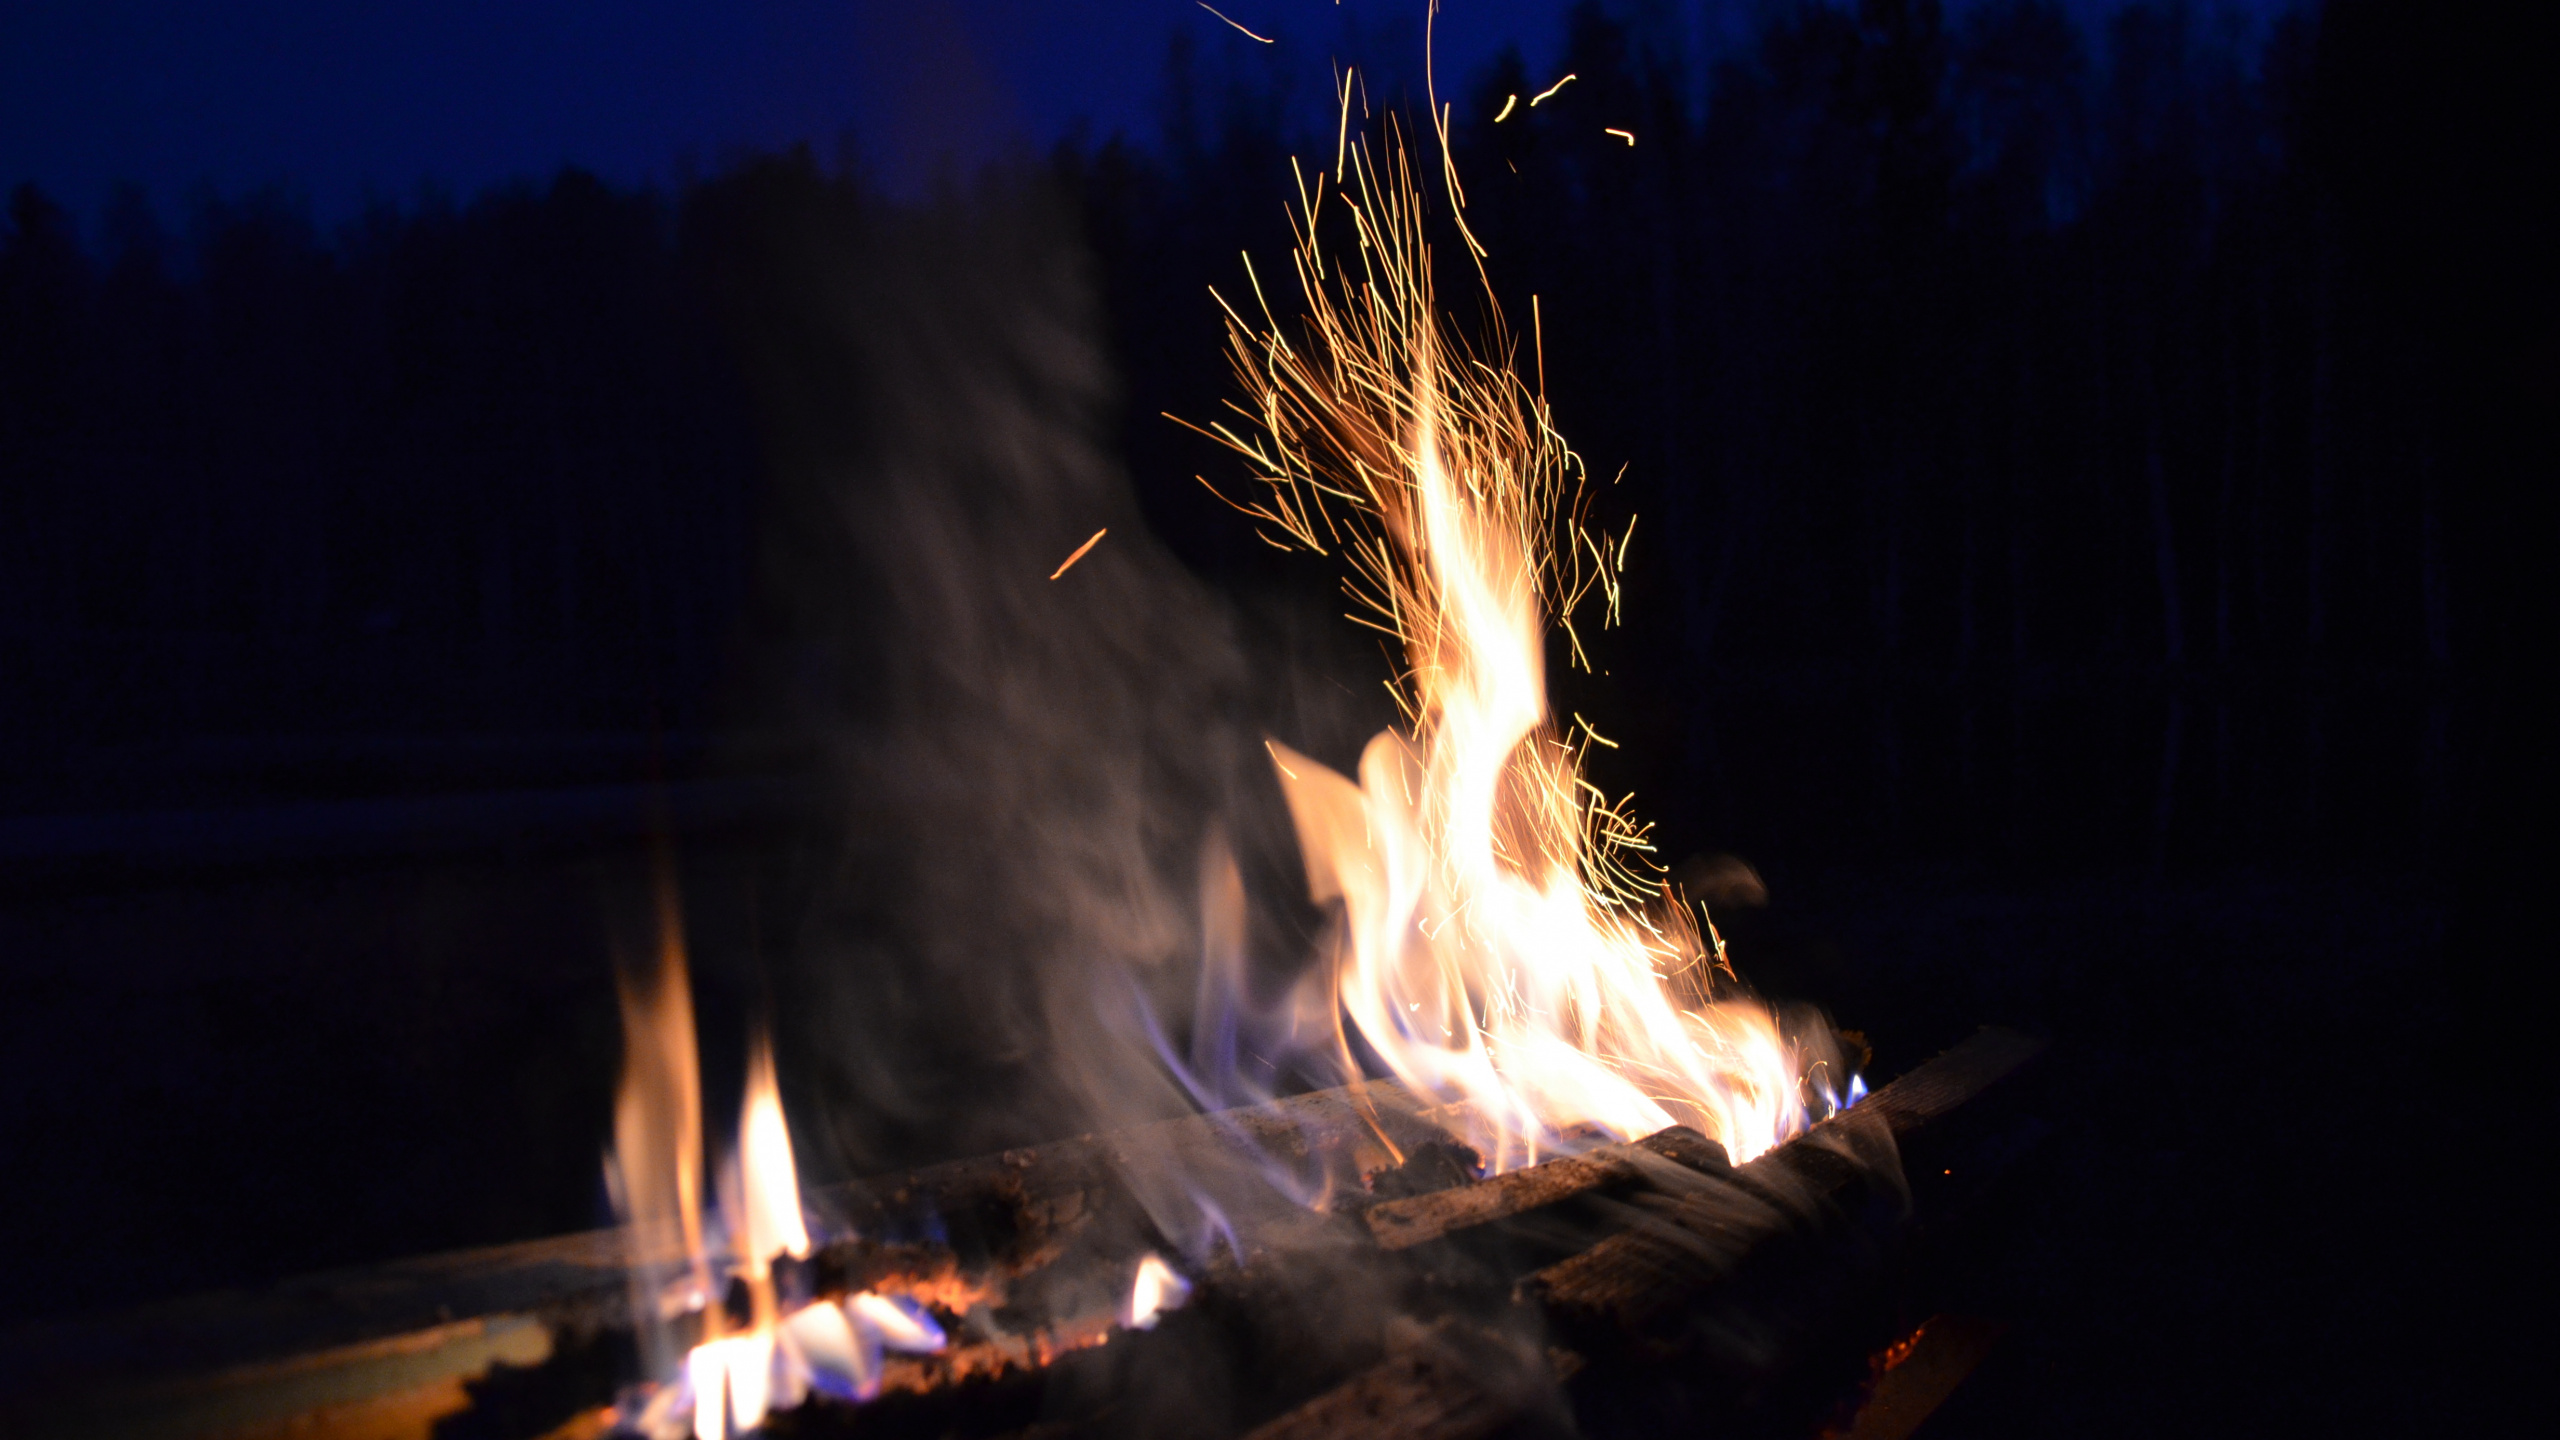 Time Lapse Photography of Fire. Wallpaper in 2560x1440 Resolution